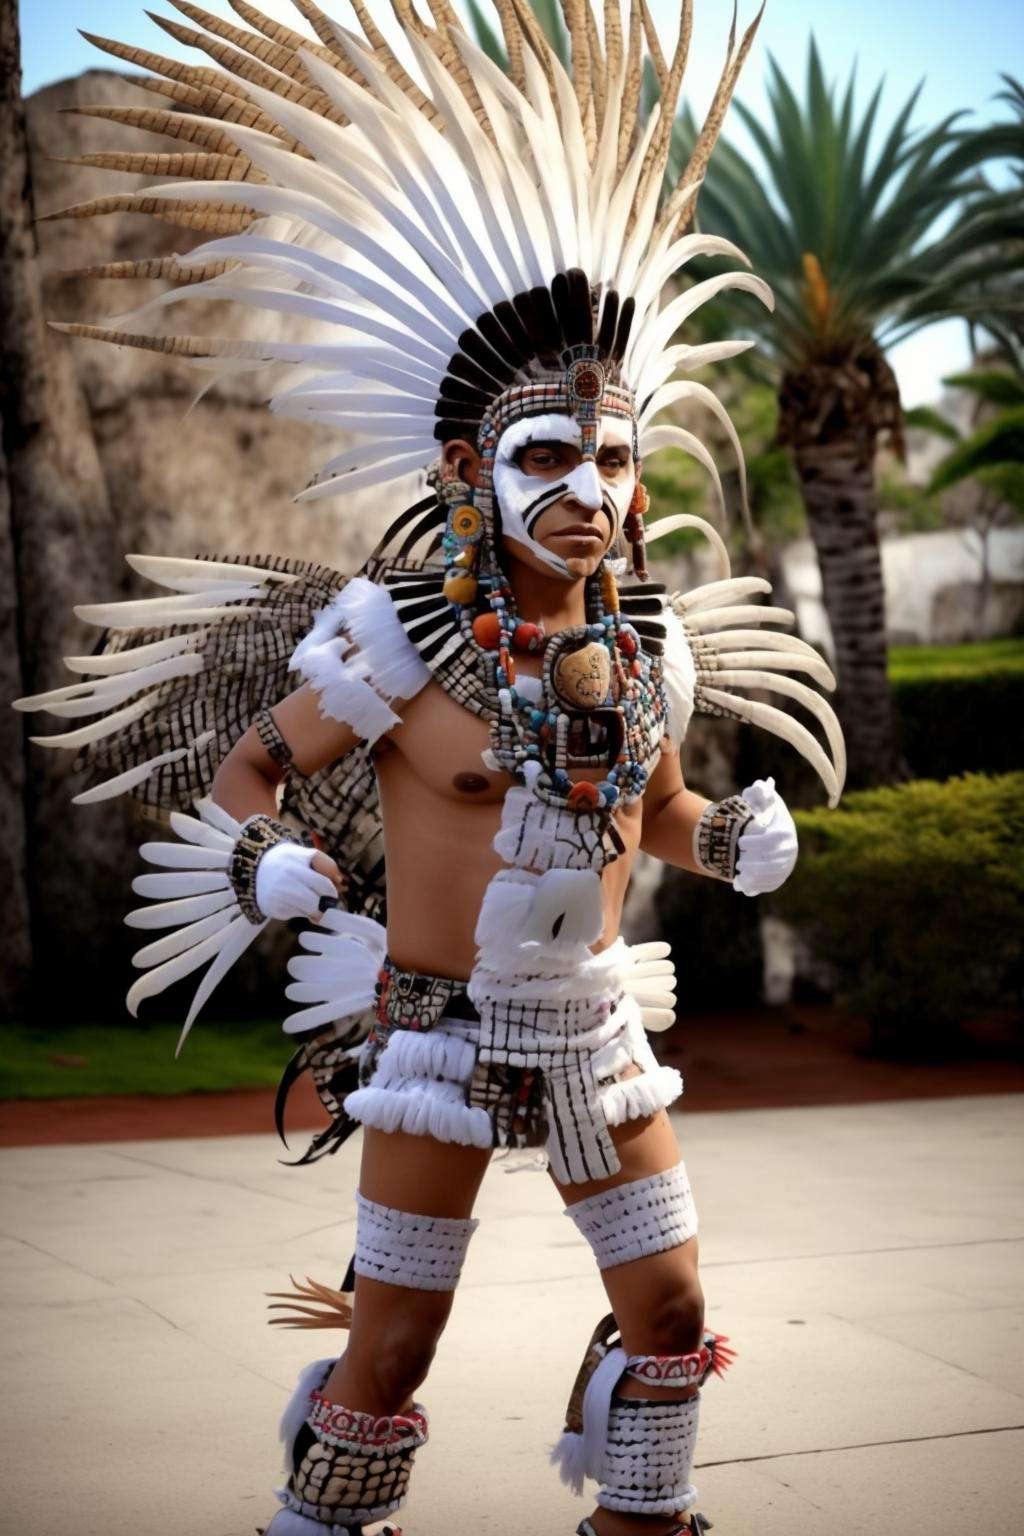 a person in a white costume with feathers